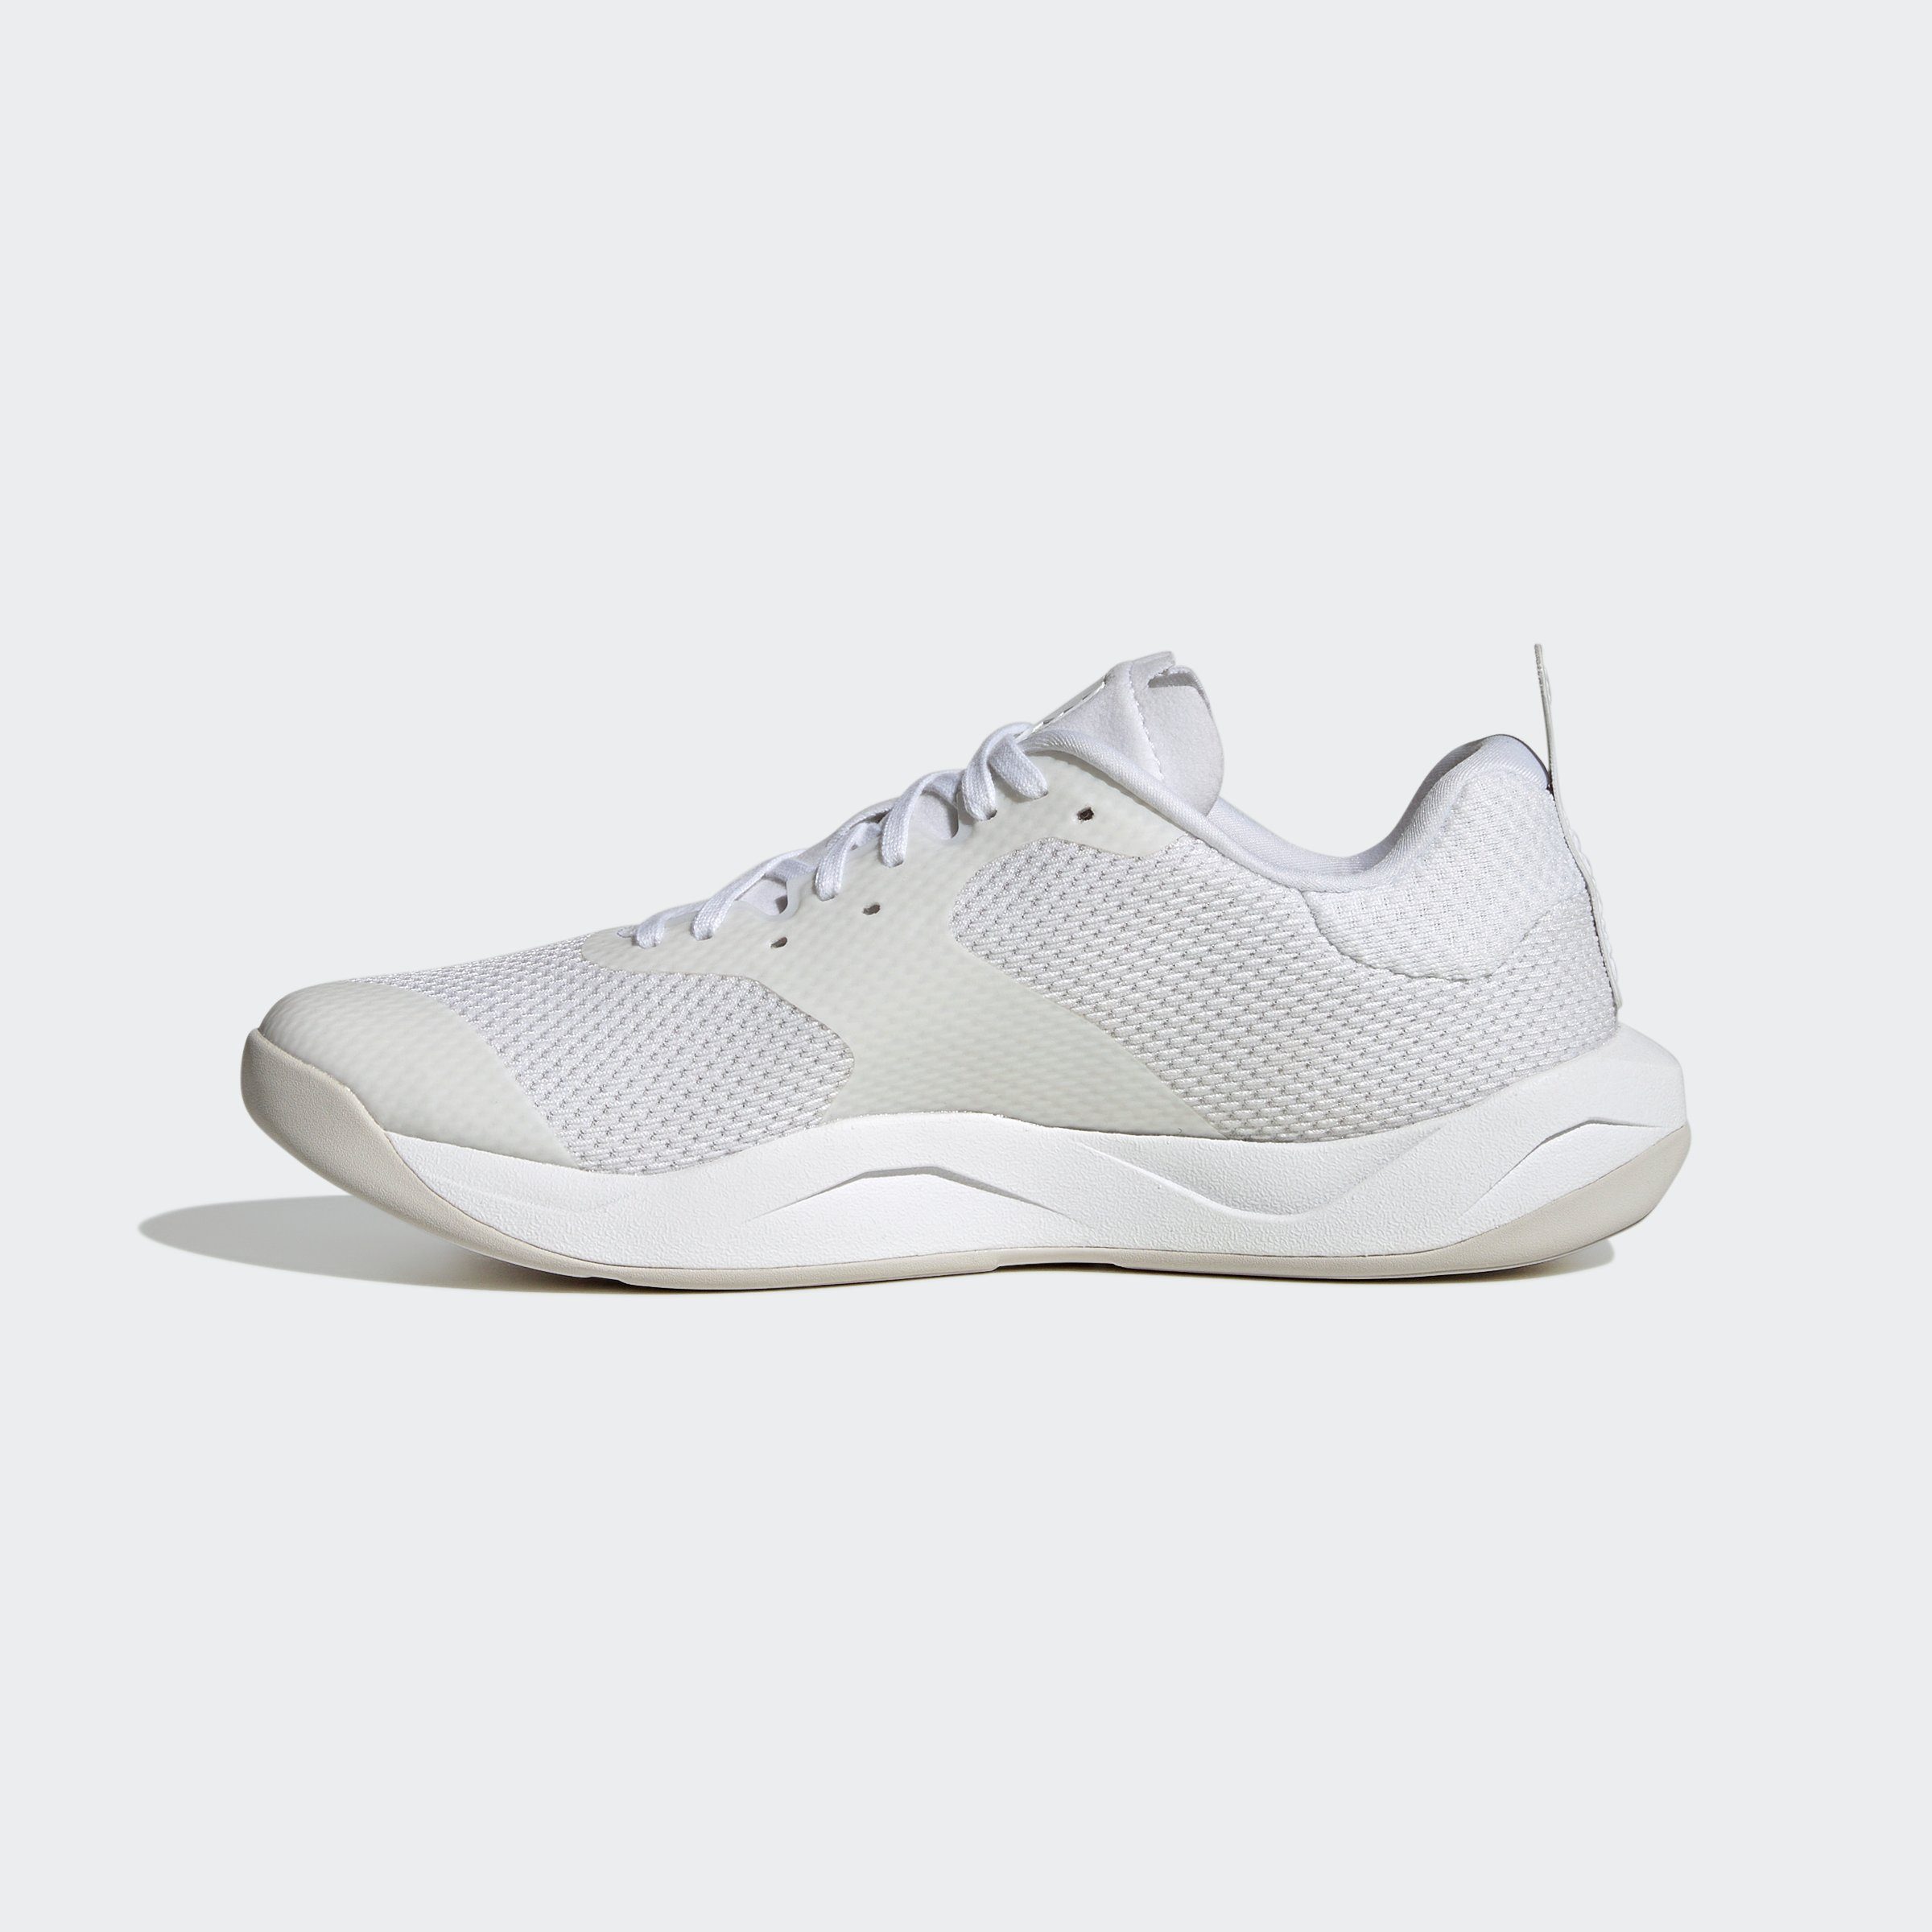 One Grey Performance Grey Fitnessschuh / RAPIDMOVE TRAININGSSCHUH Two / adidas Cloud White